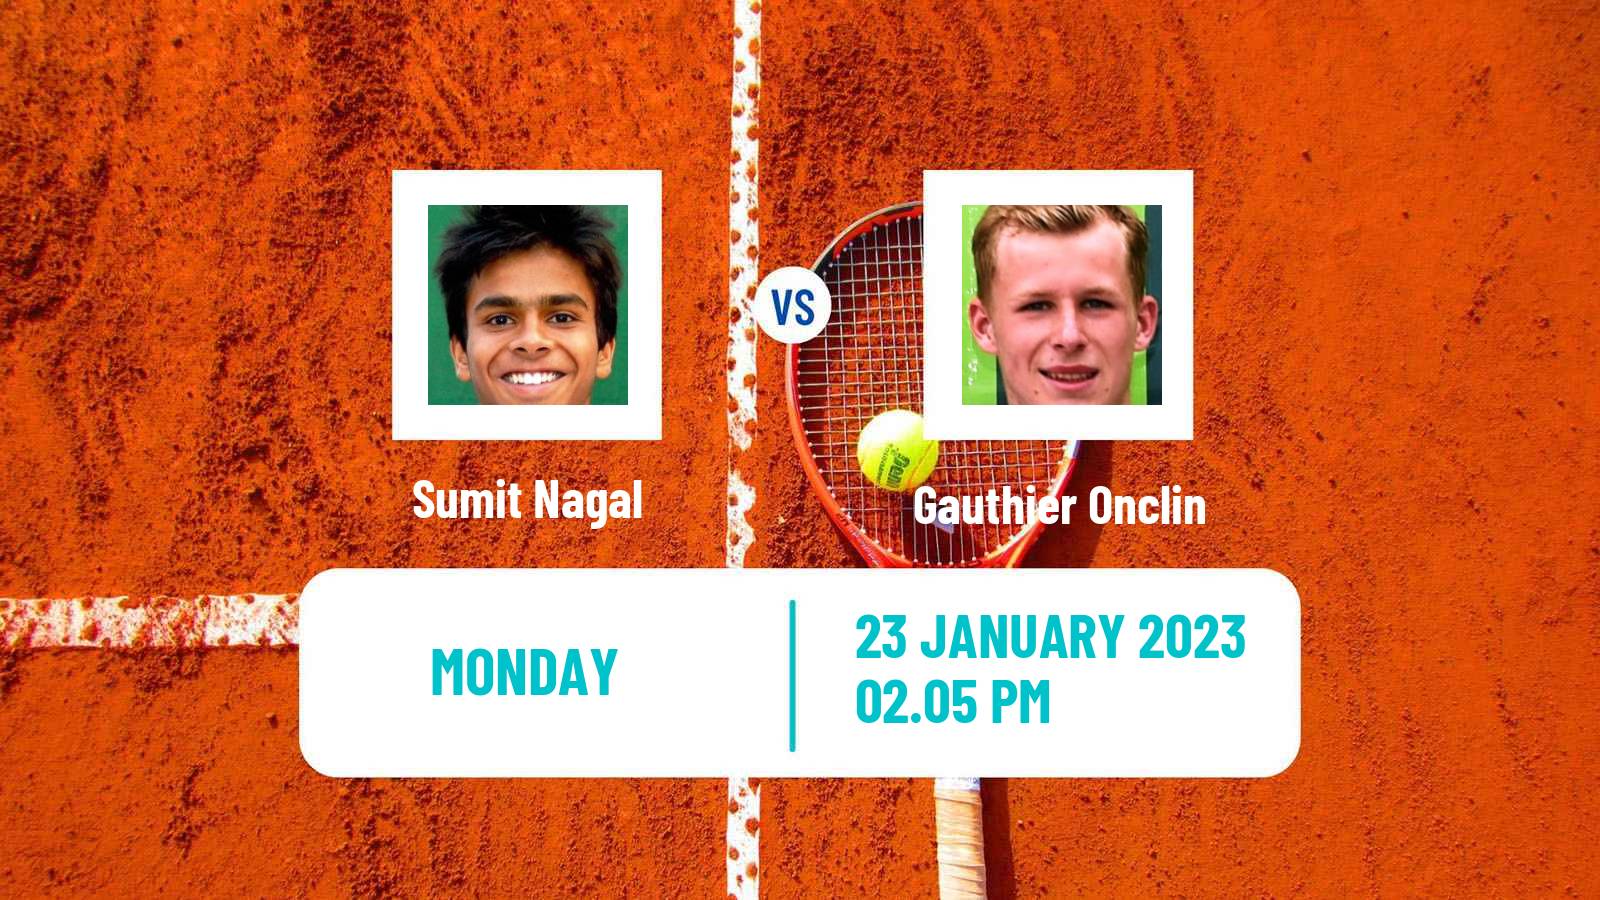 Tennis ATP Challenger Sumit Nagal - Gauthier Onclin